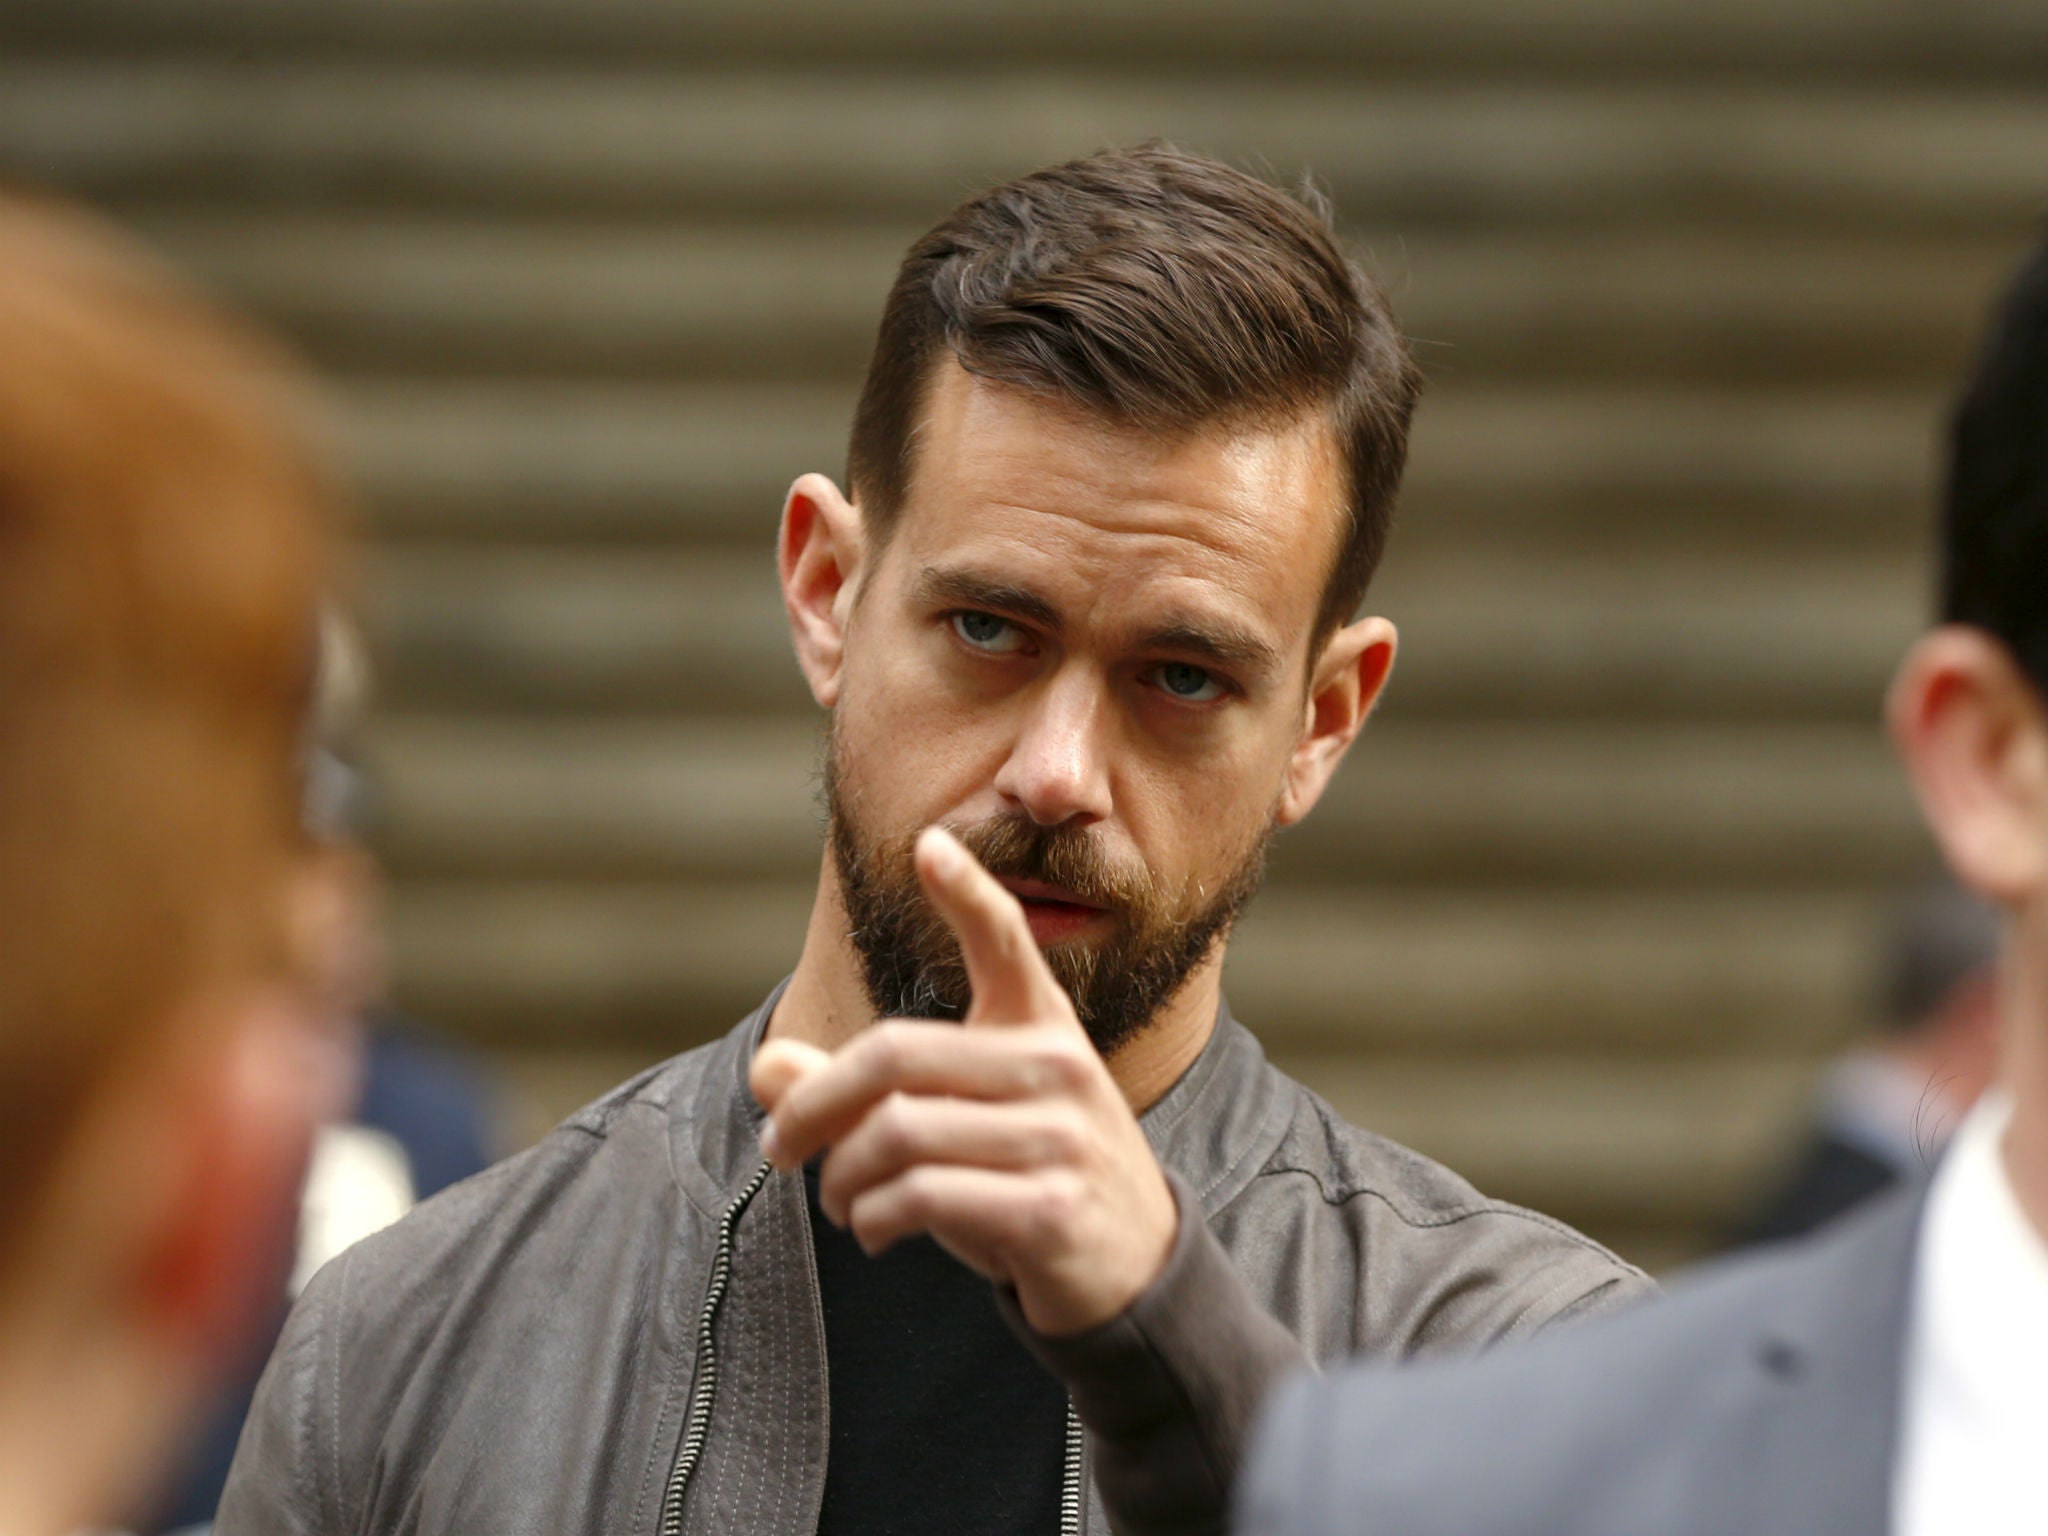 CEO Jack Dorsey said Twitter needs a new approach